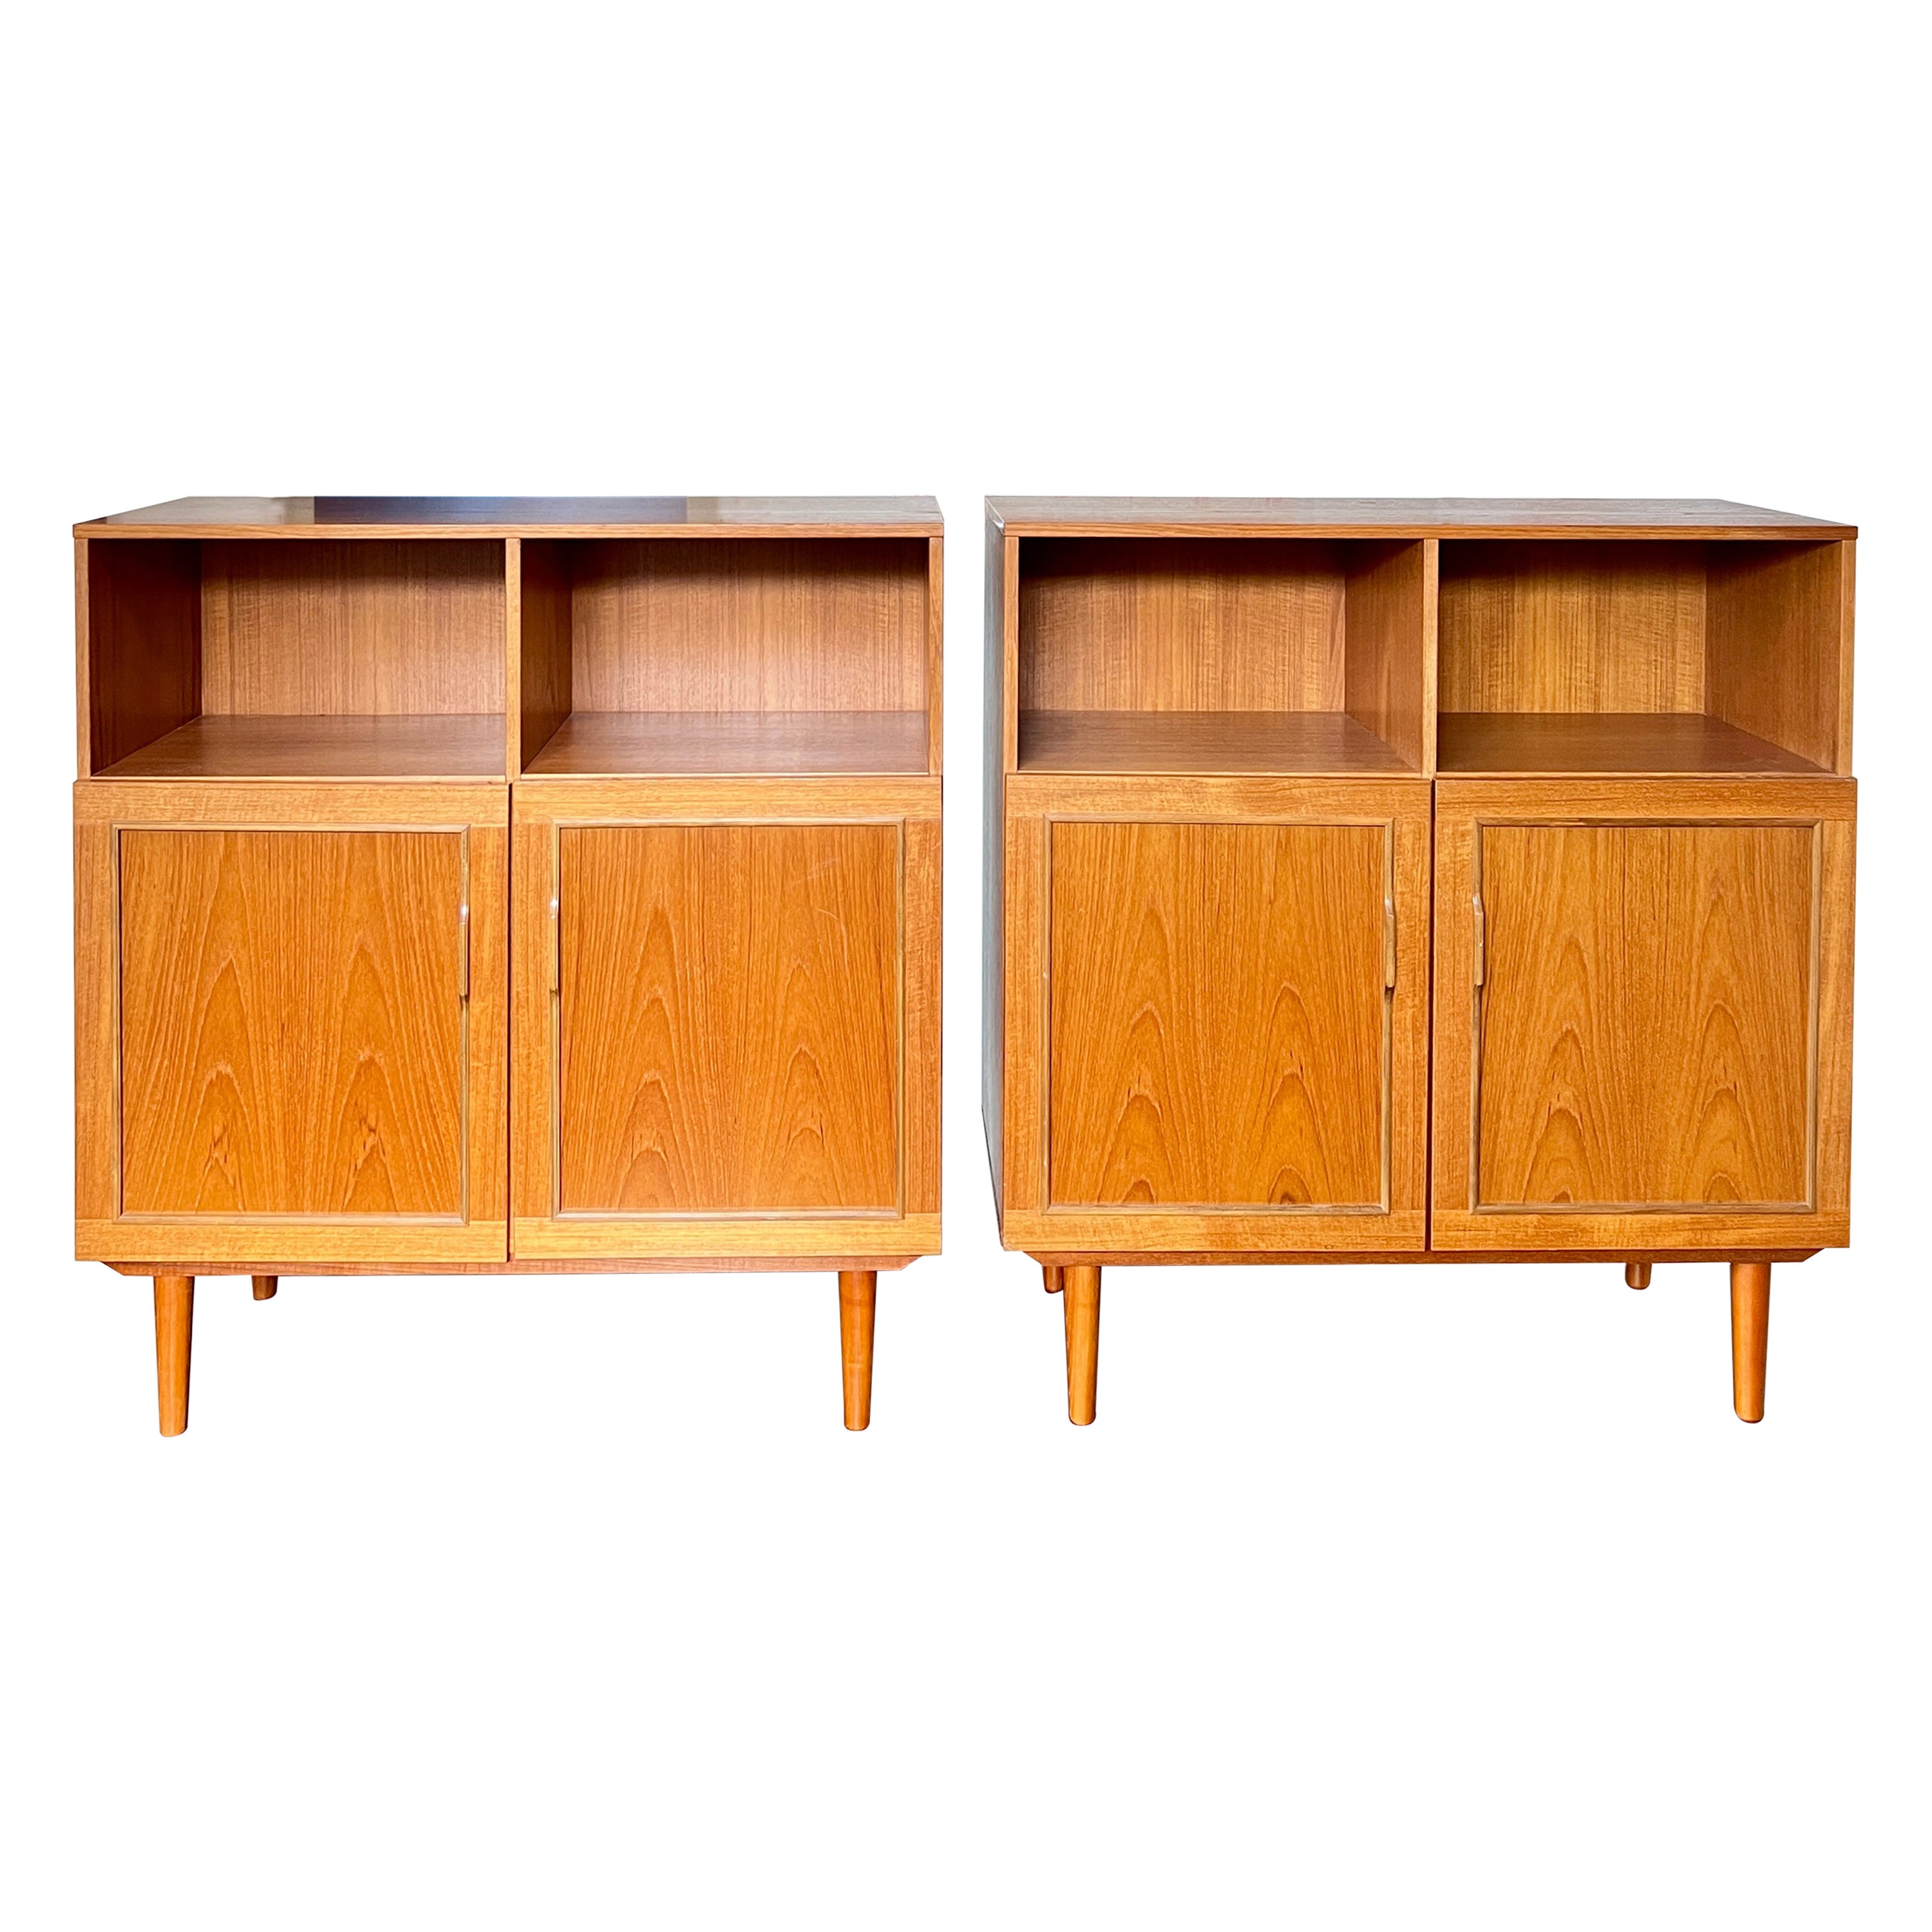 A set of 2 Danish mid century modern double door record / occasional cabinets